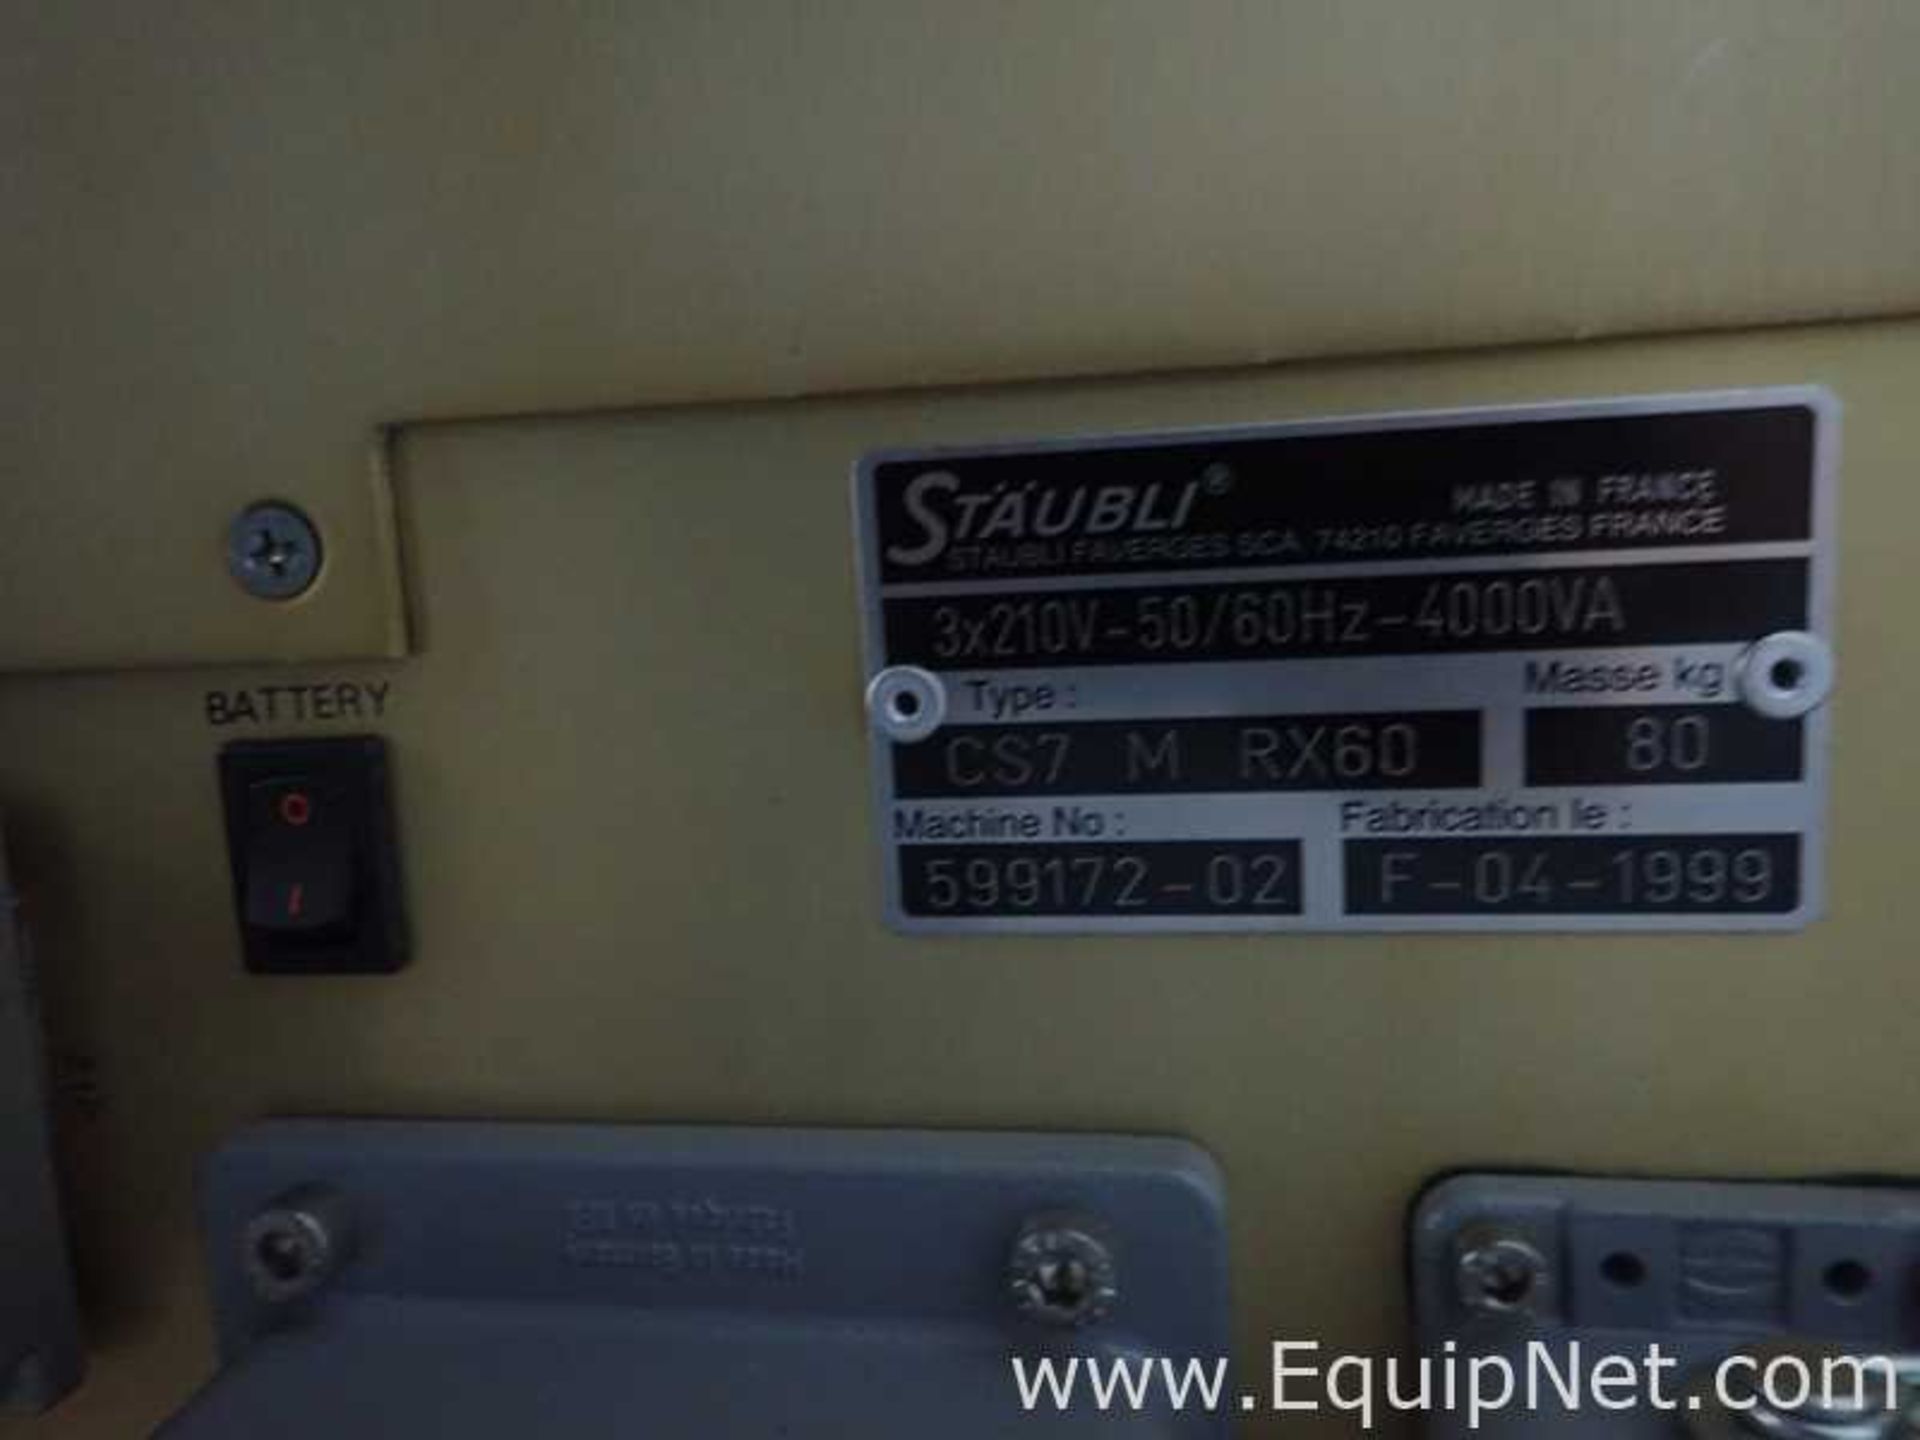 EQUIPNET LISTING #814947; REMOVAL COST: $25; MODEL: RX-60; DESCRIPTION: Staubli RX-60 CRaut - Image 7 of 10